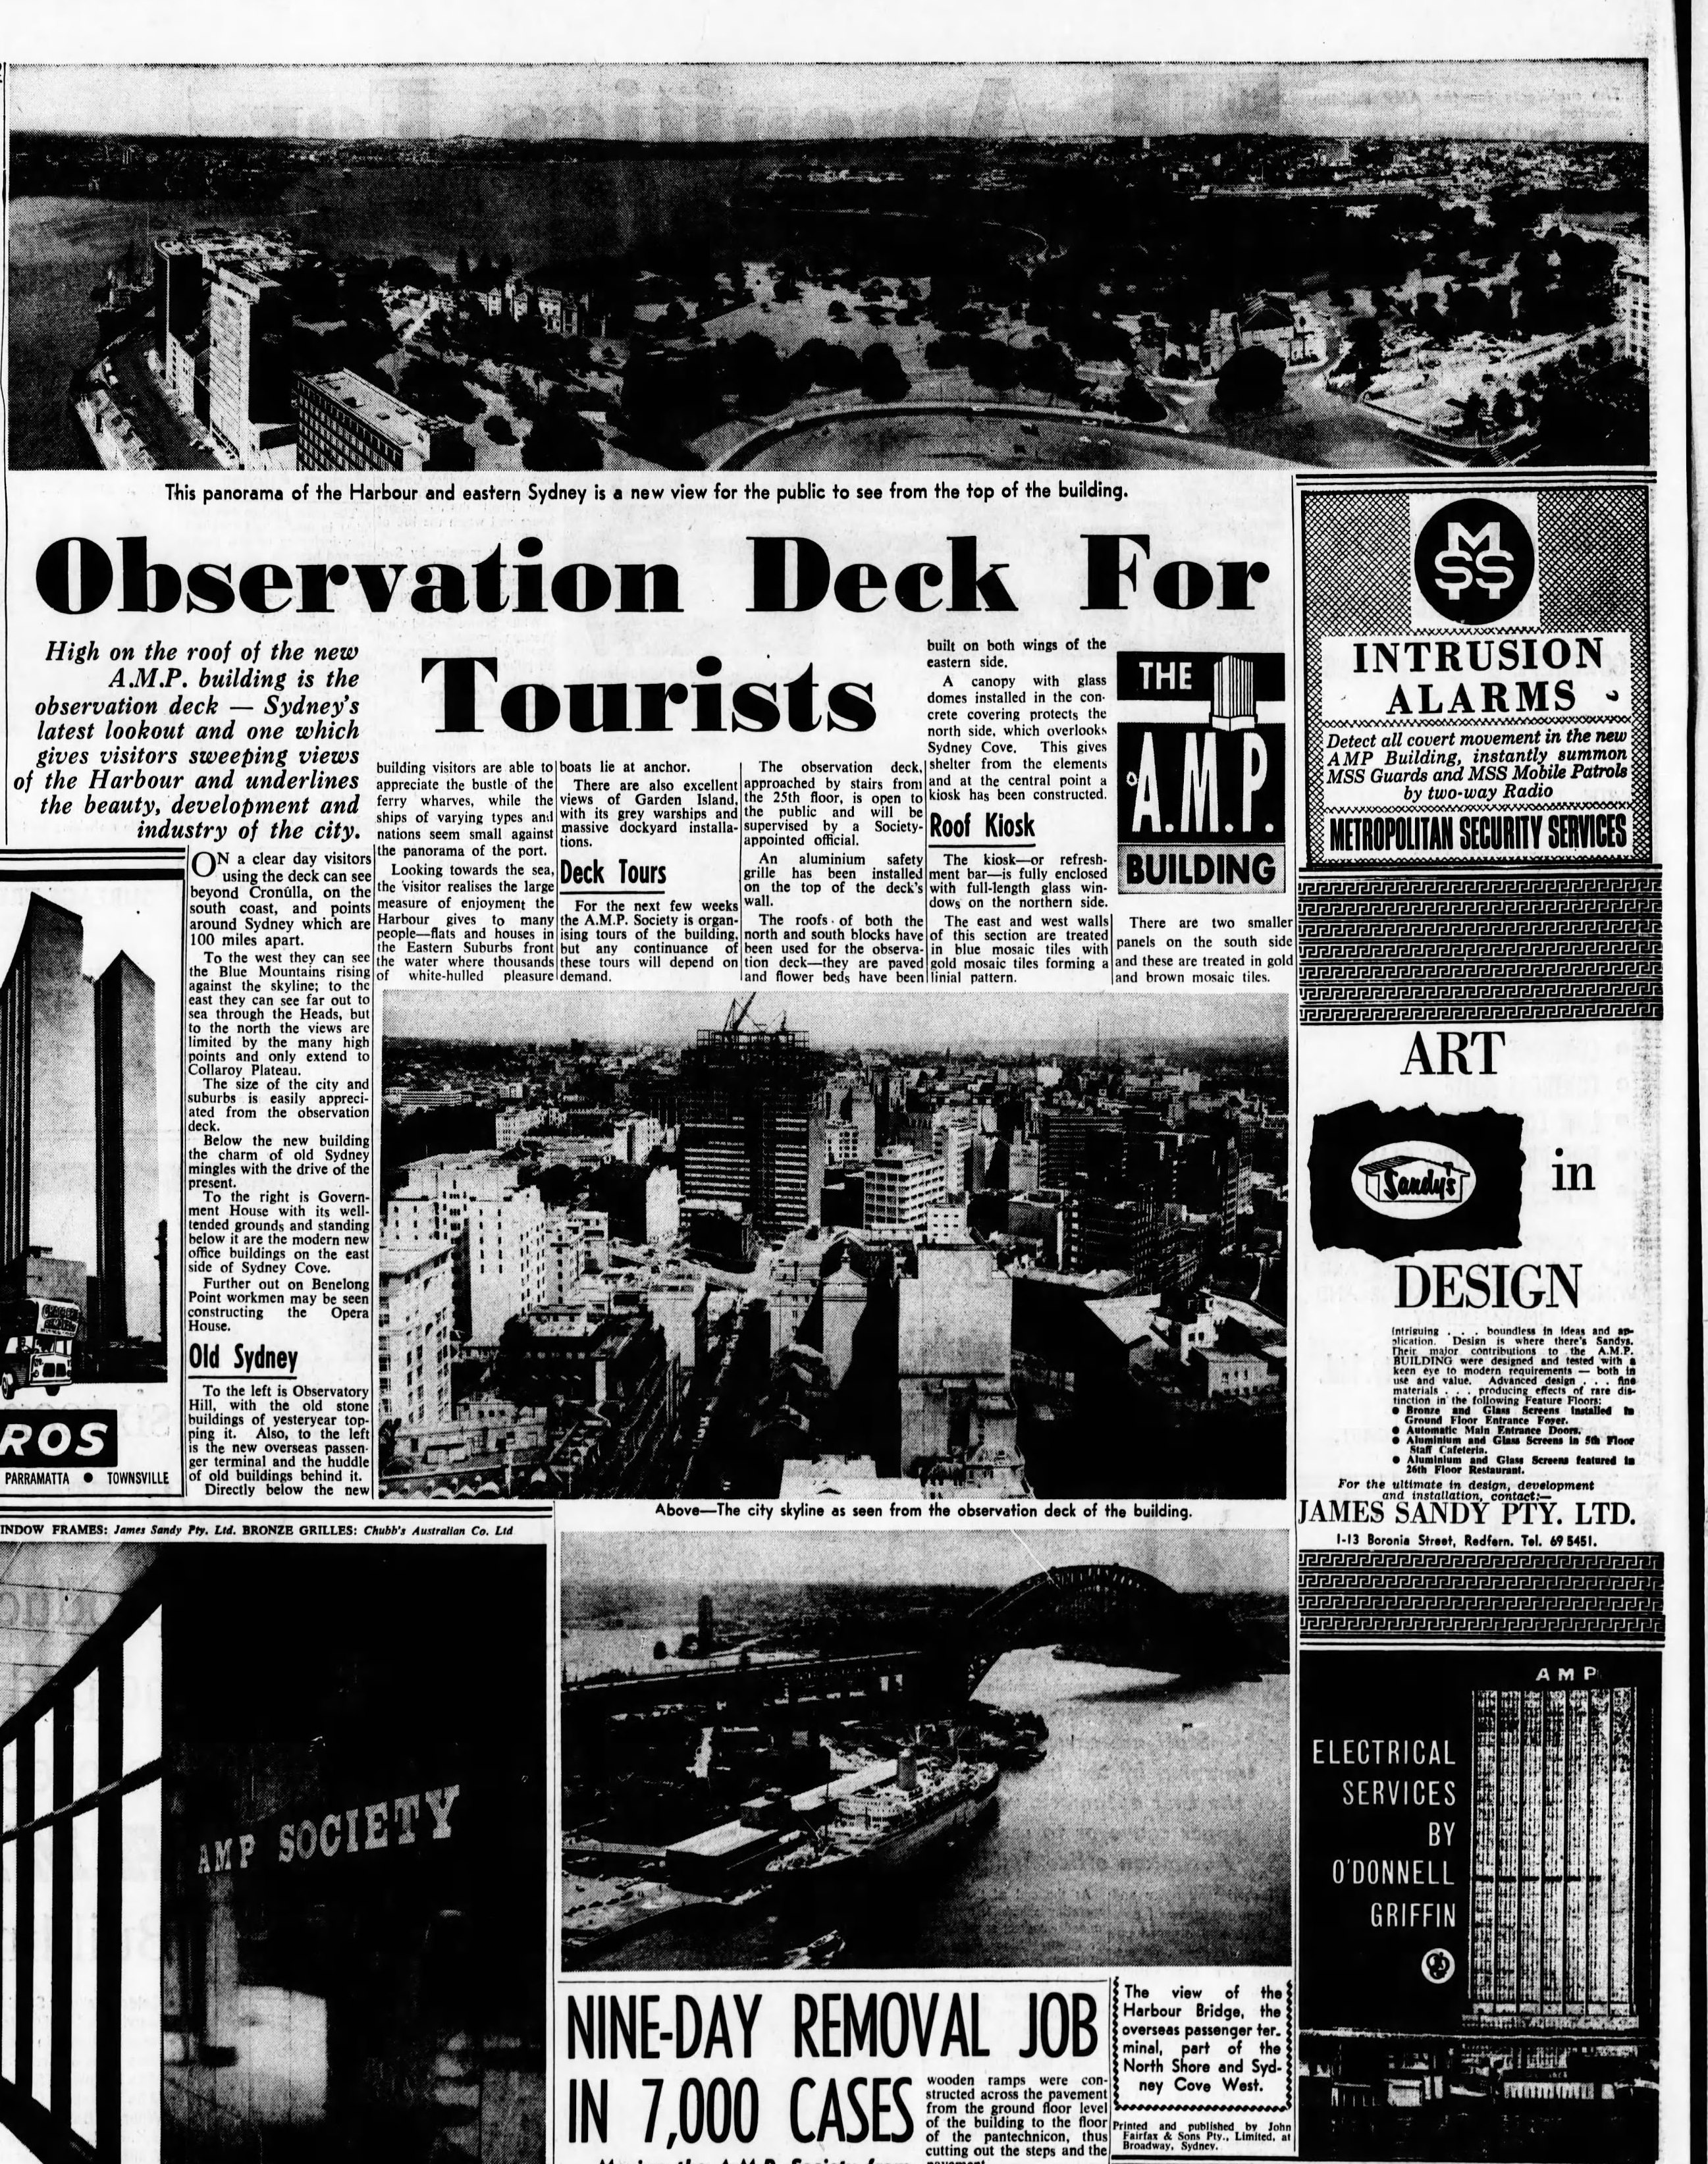 AMP Building Opening Supplement February 26 1962 SMH 10 - Observation Deck Feature